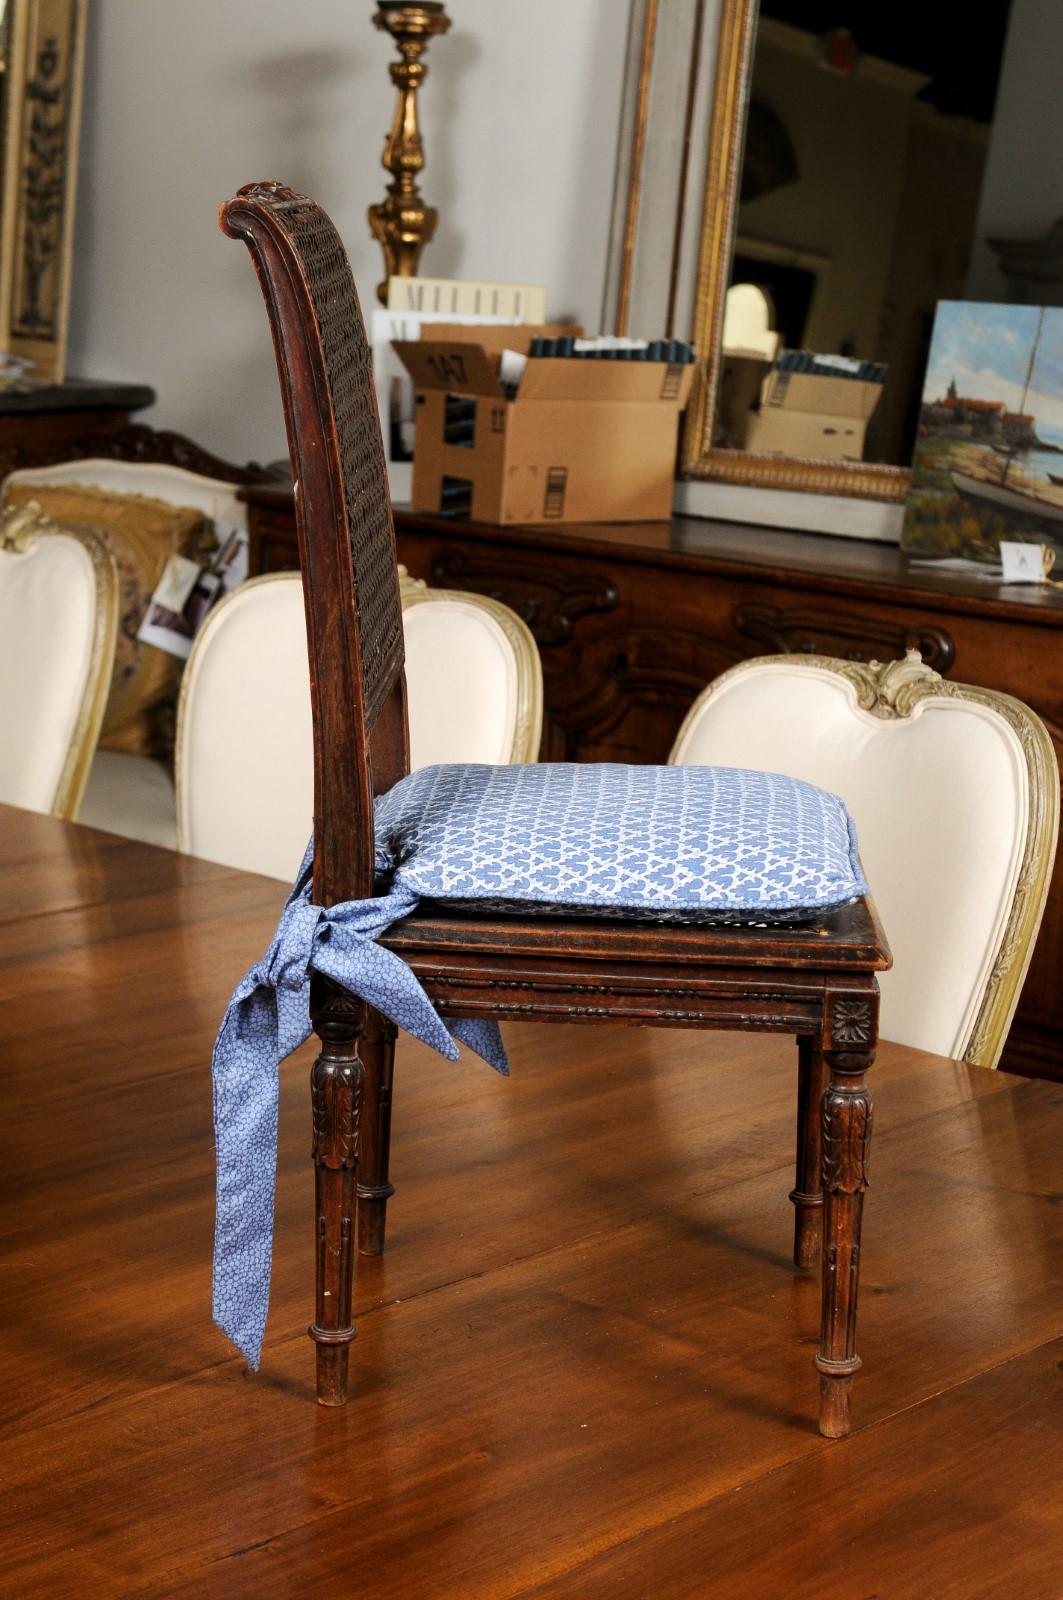 Upholstery French 1890s Walnut Child's Chair with Cane Accents and Blue Upholstered Cushion